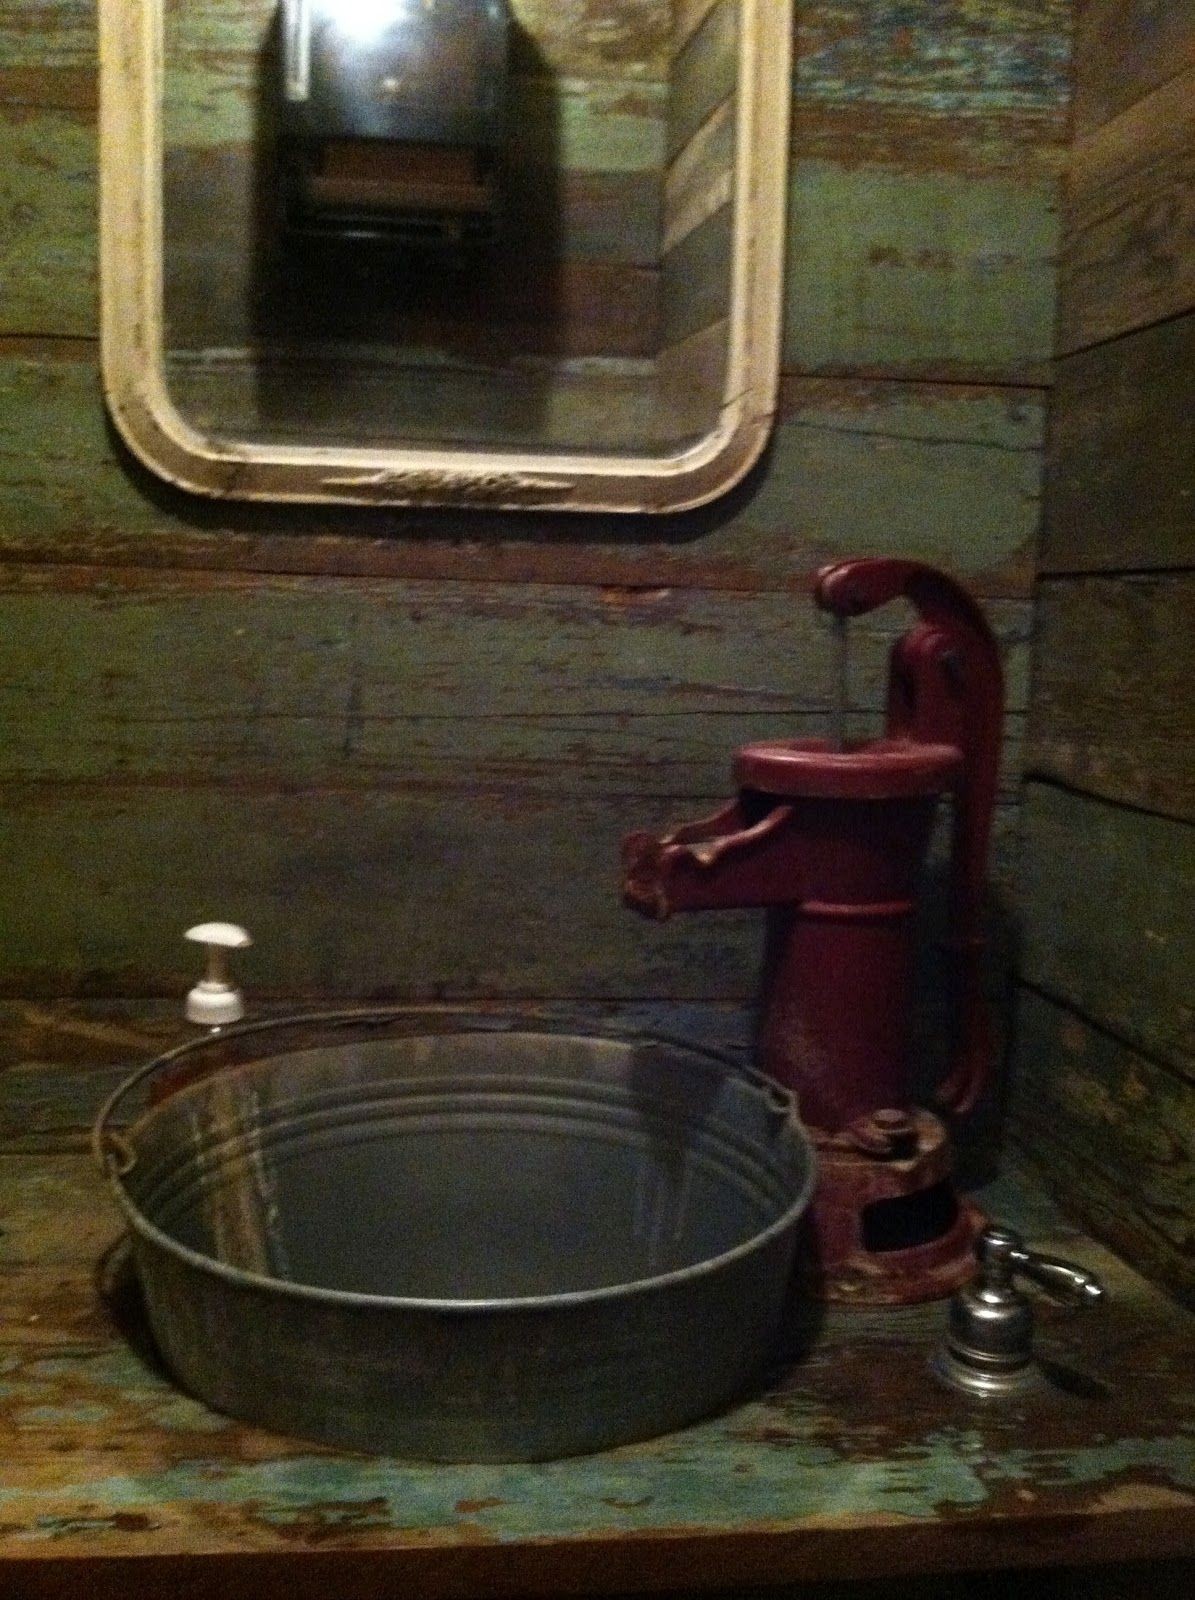 Ranch style sink